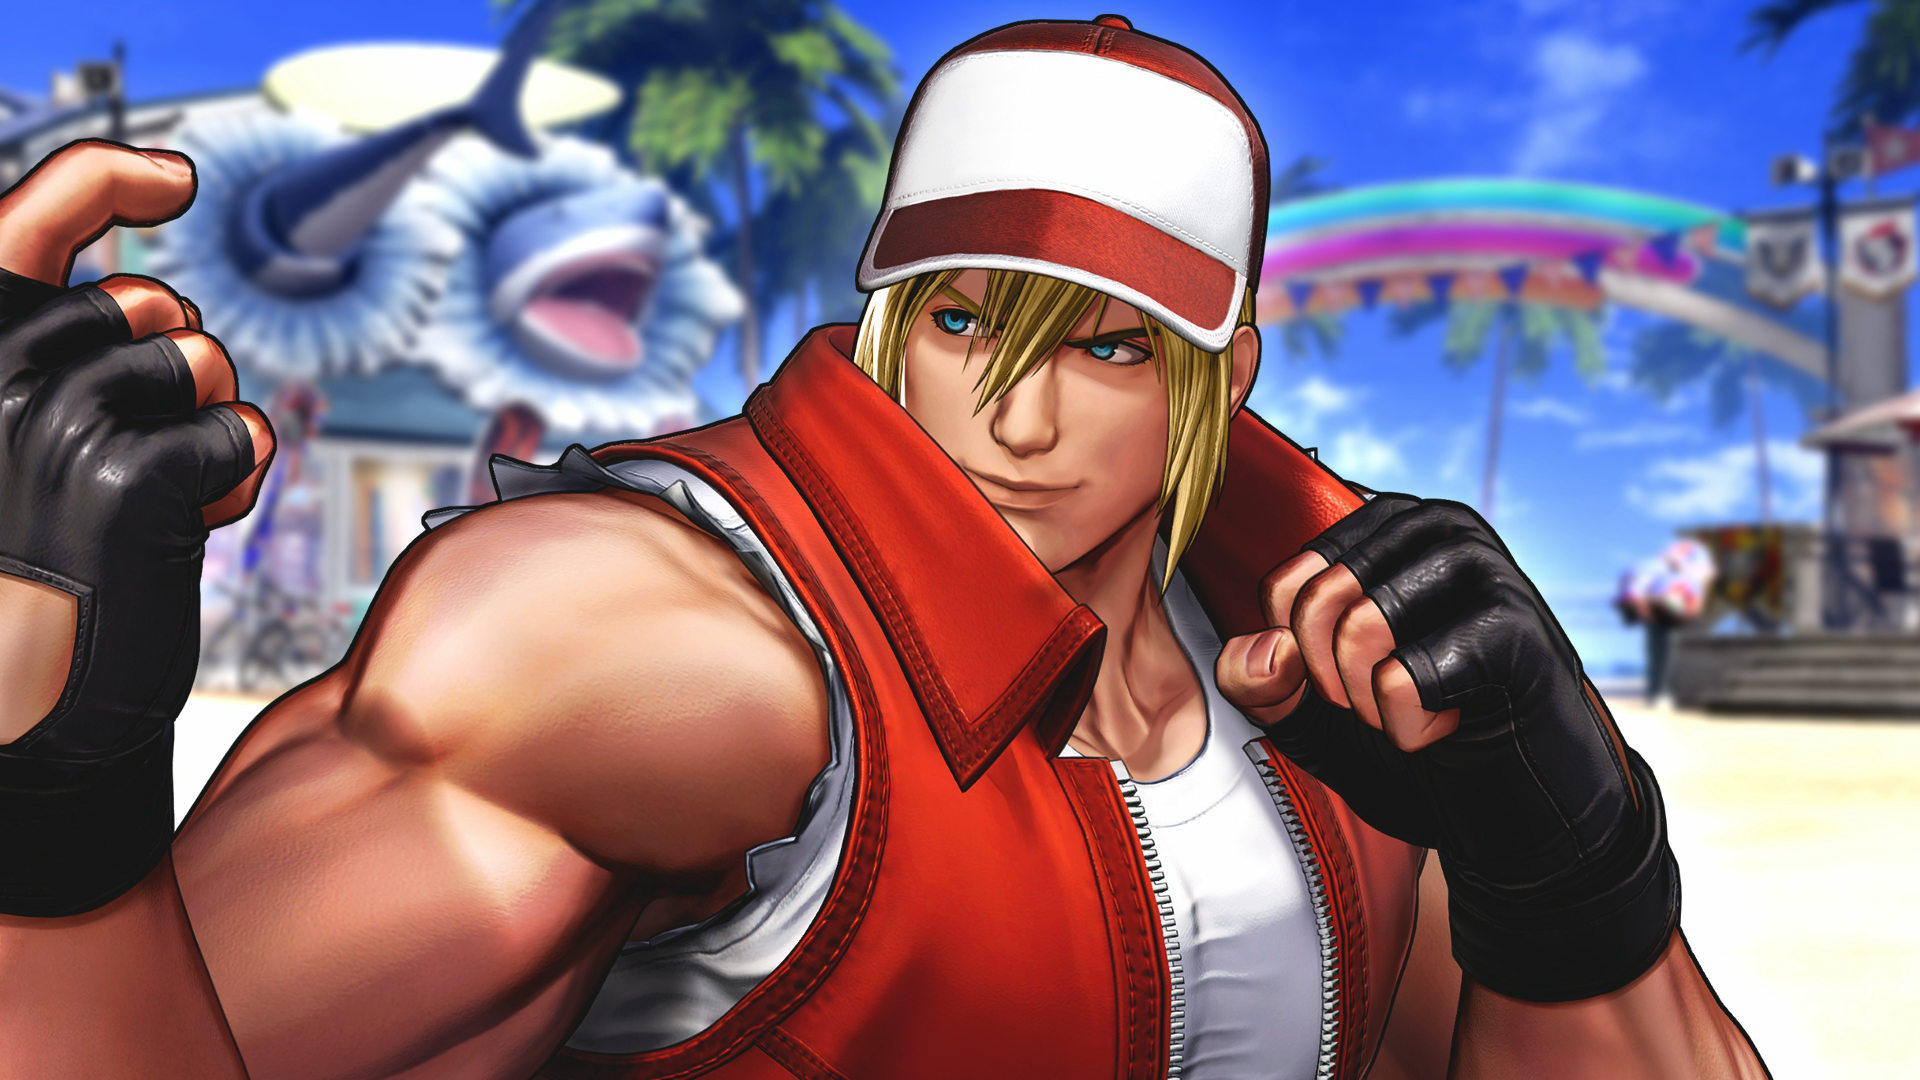 King fighters steam фото 107